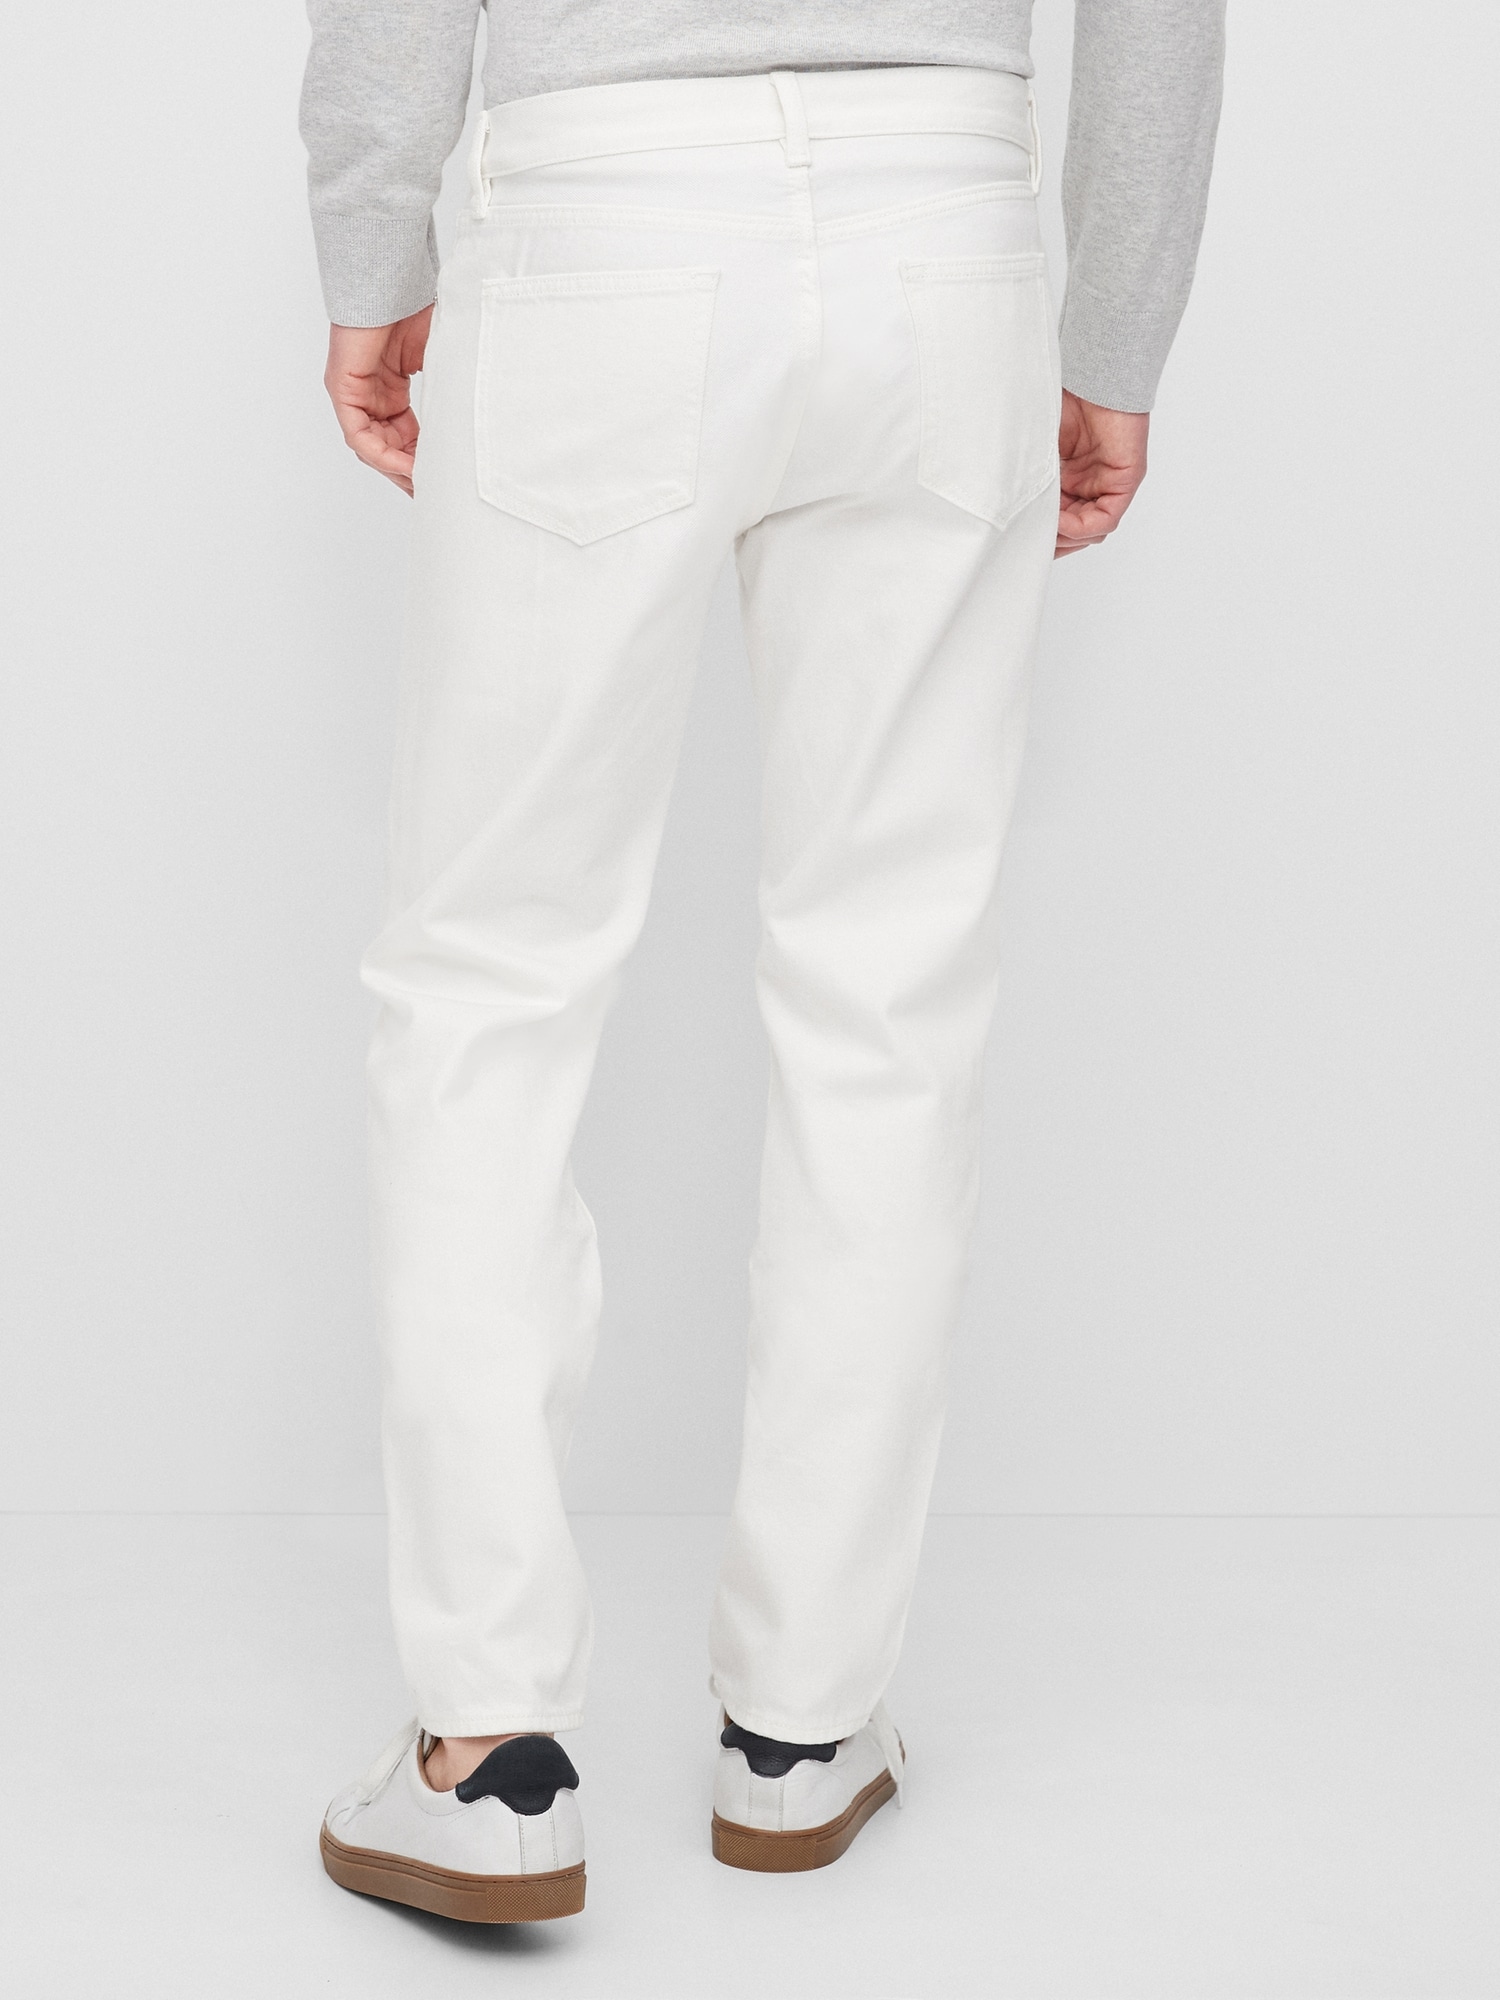 Made with Organically Grown Cotton Athletic-Fit White Denim Jean